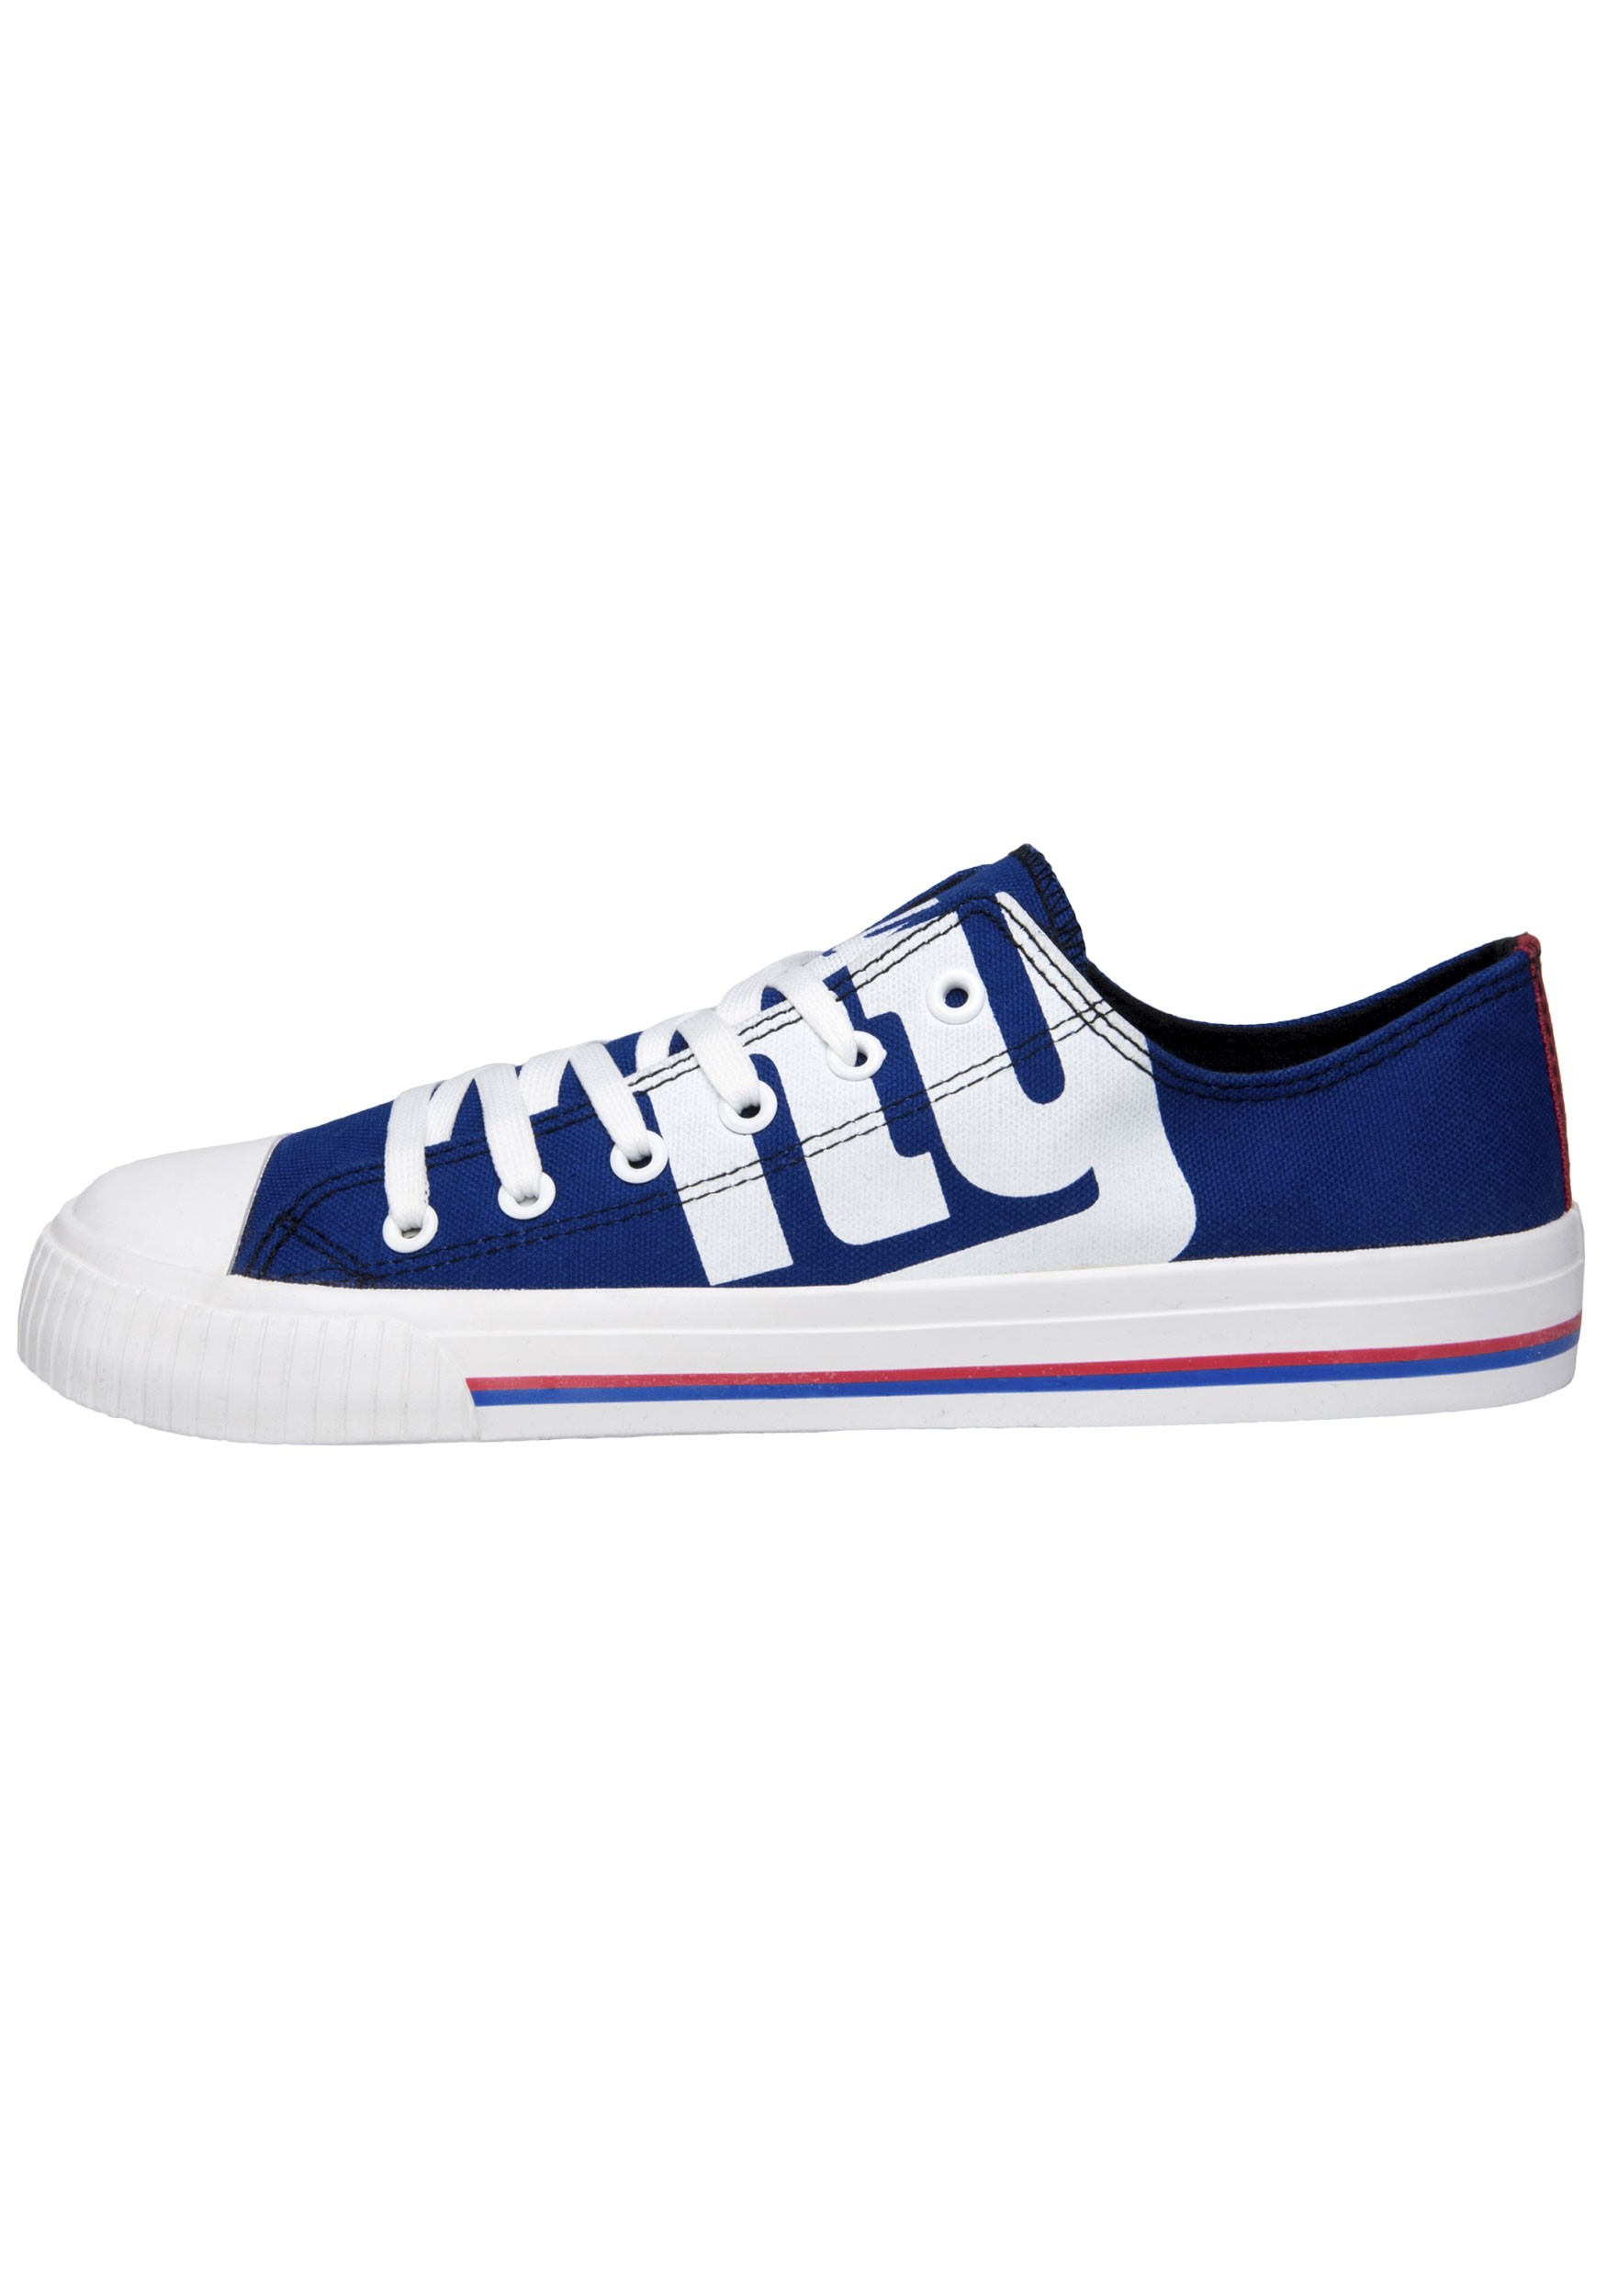 Youth NFL Giants Low Top Canvas Shoes